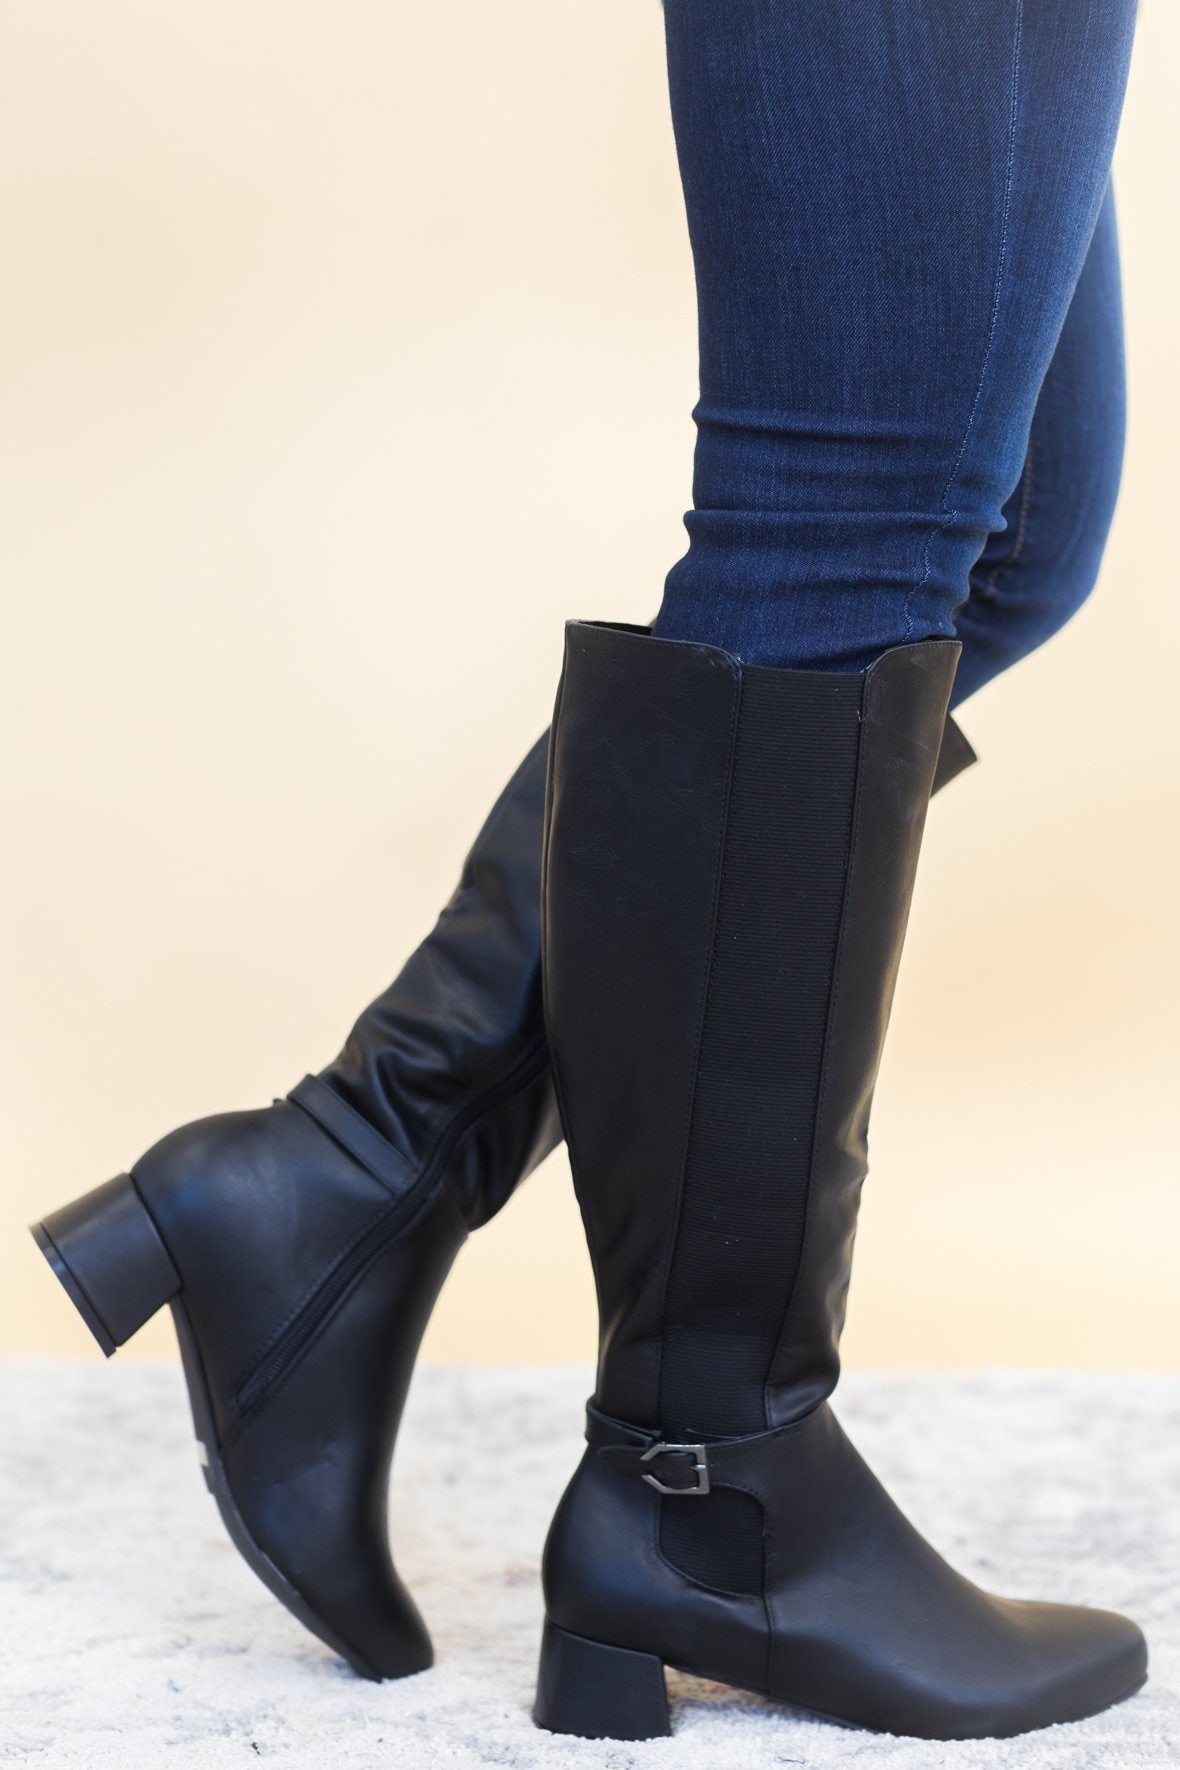 black boots for walking